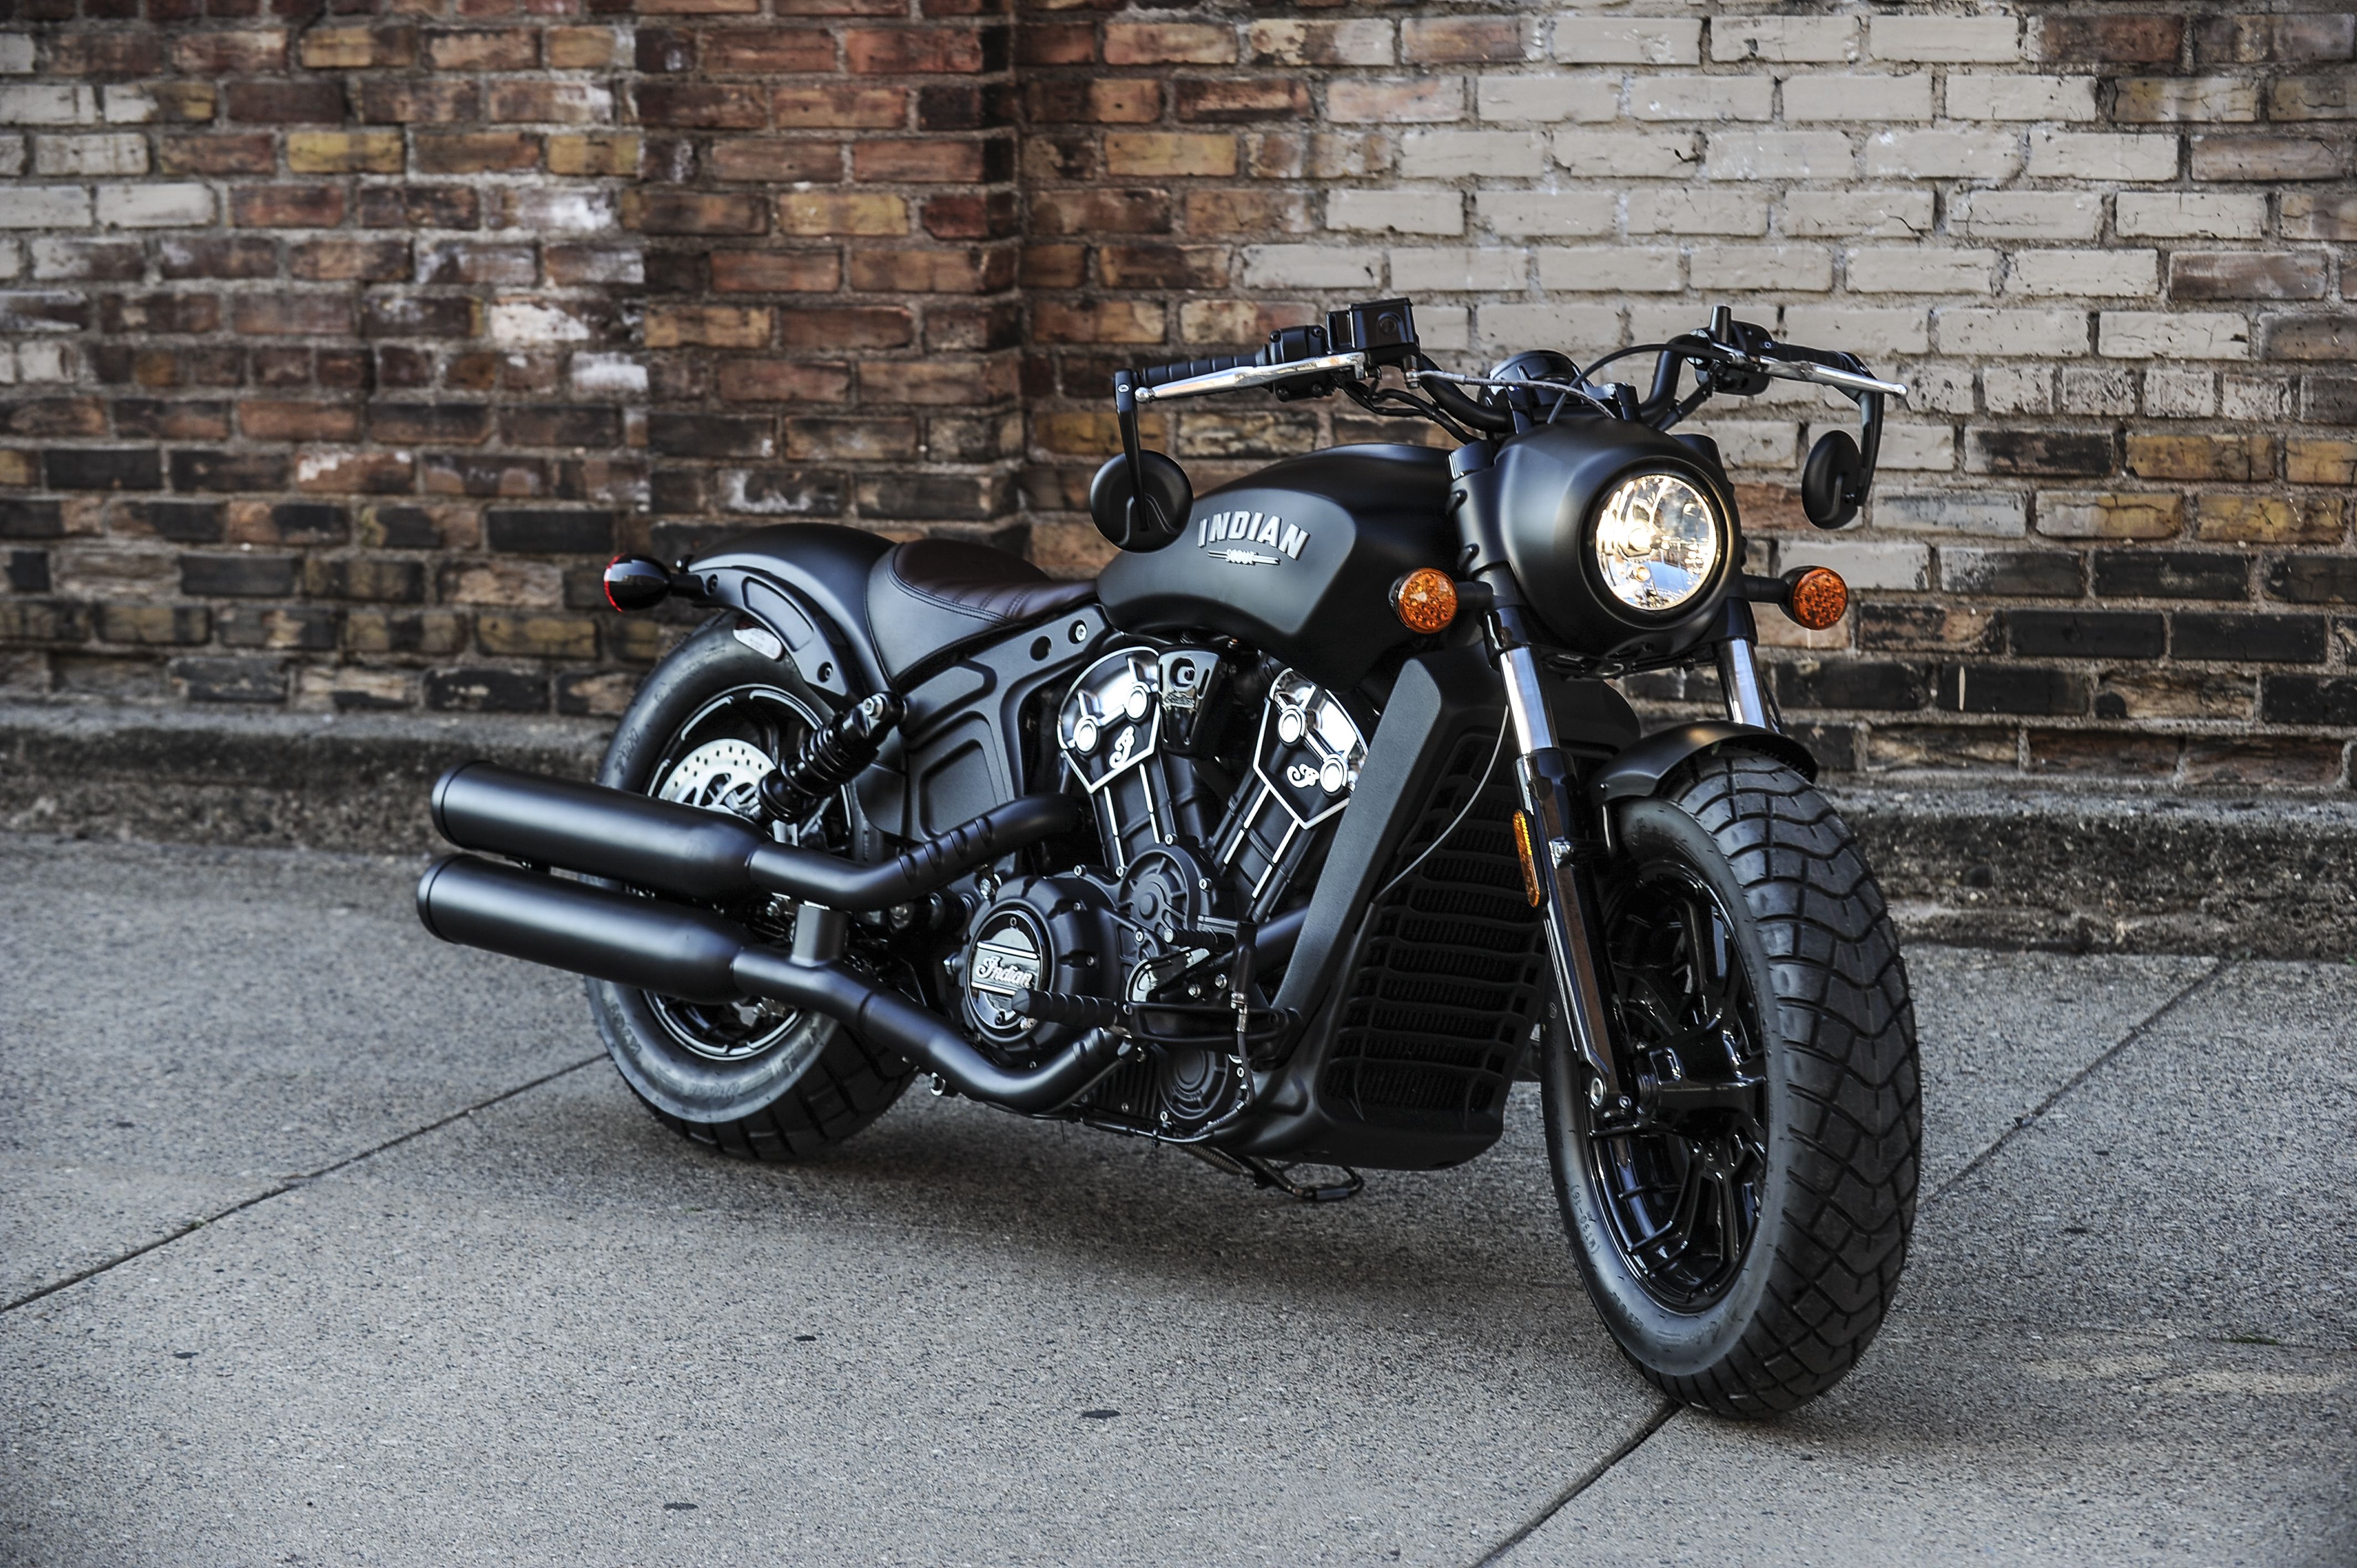 Indian motorcycles desktop wallpapers HD and wide wallpapers